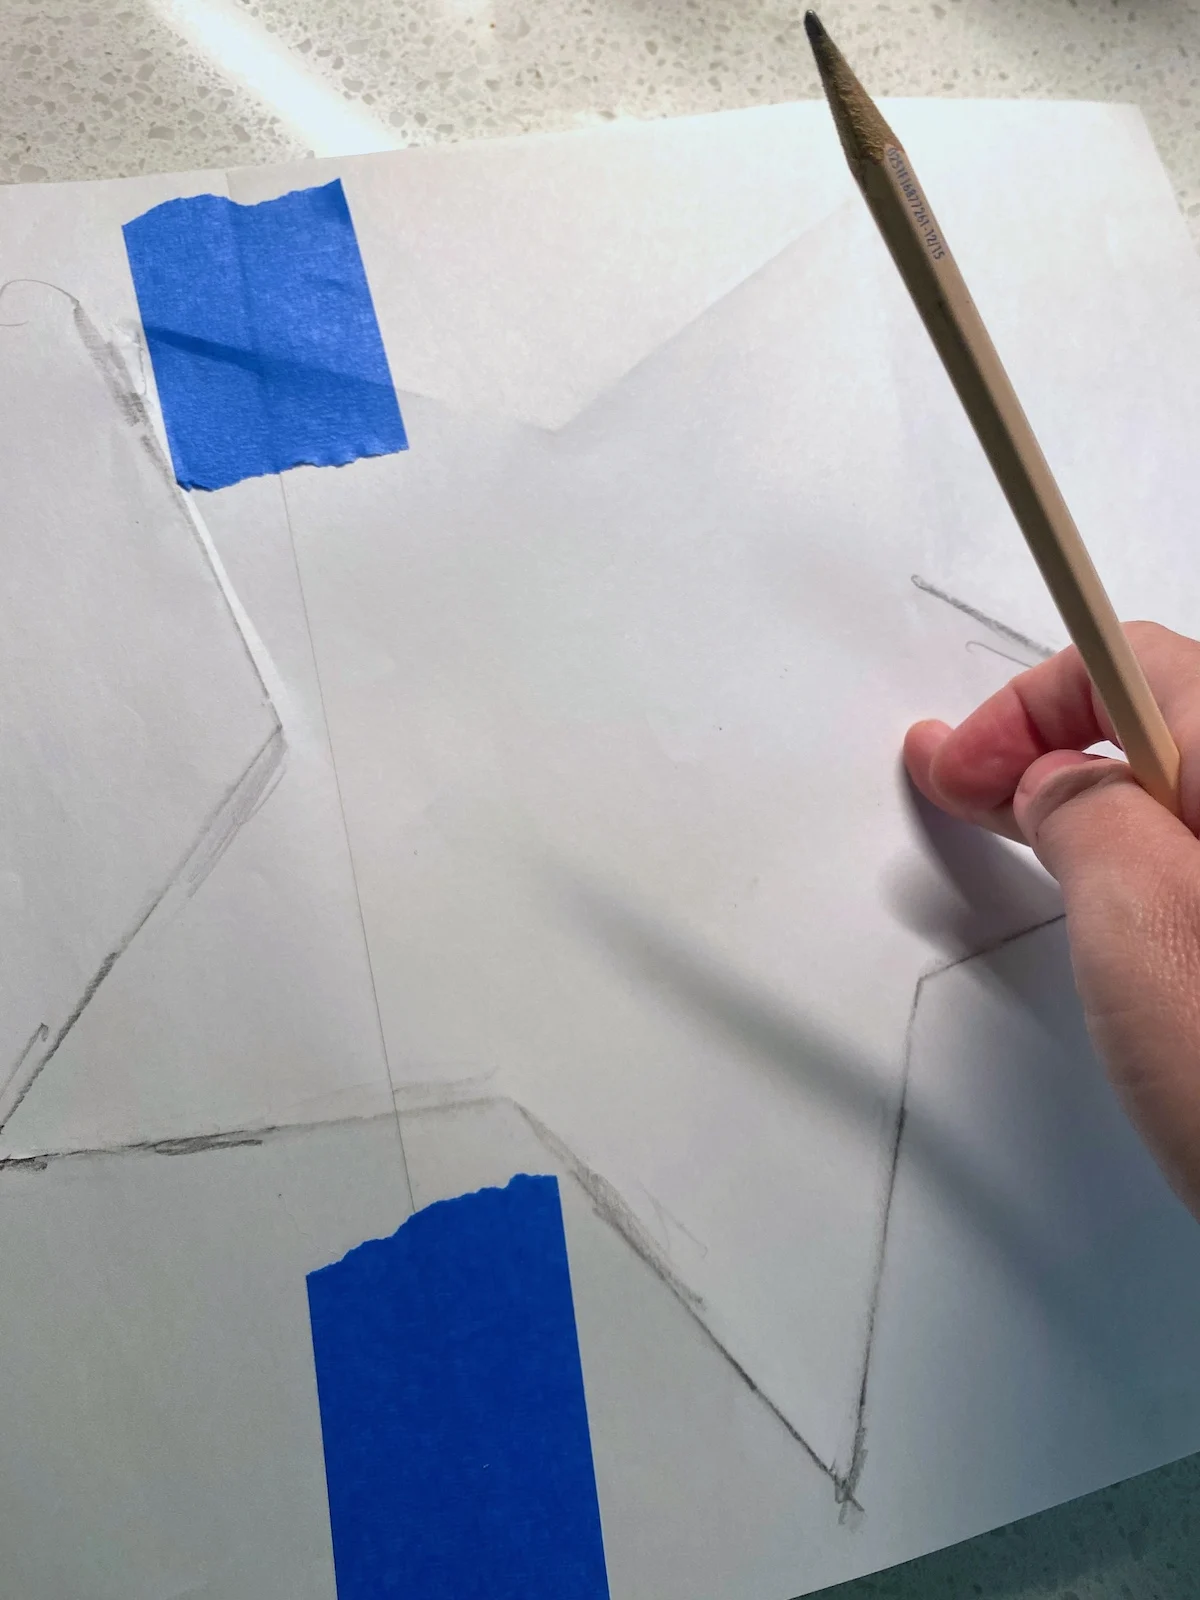 Making a paper template of the star shape